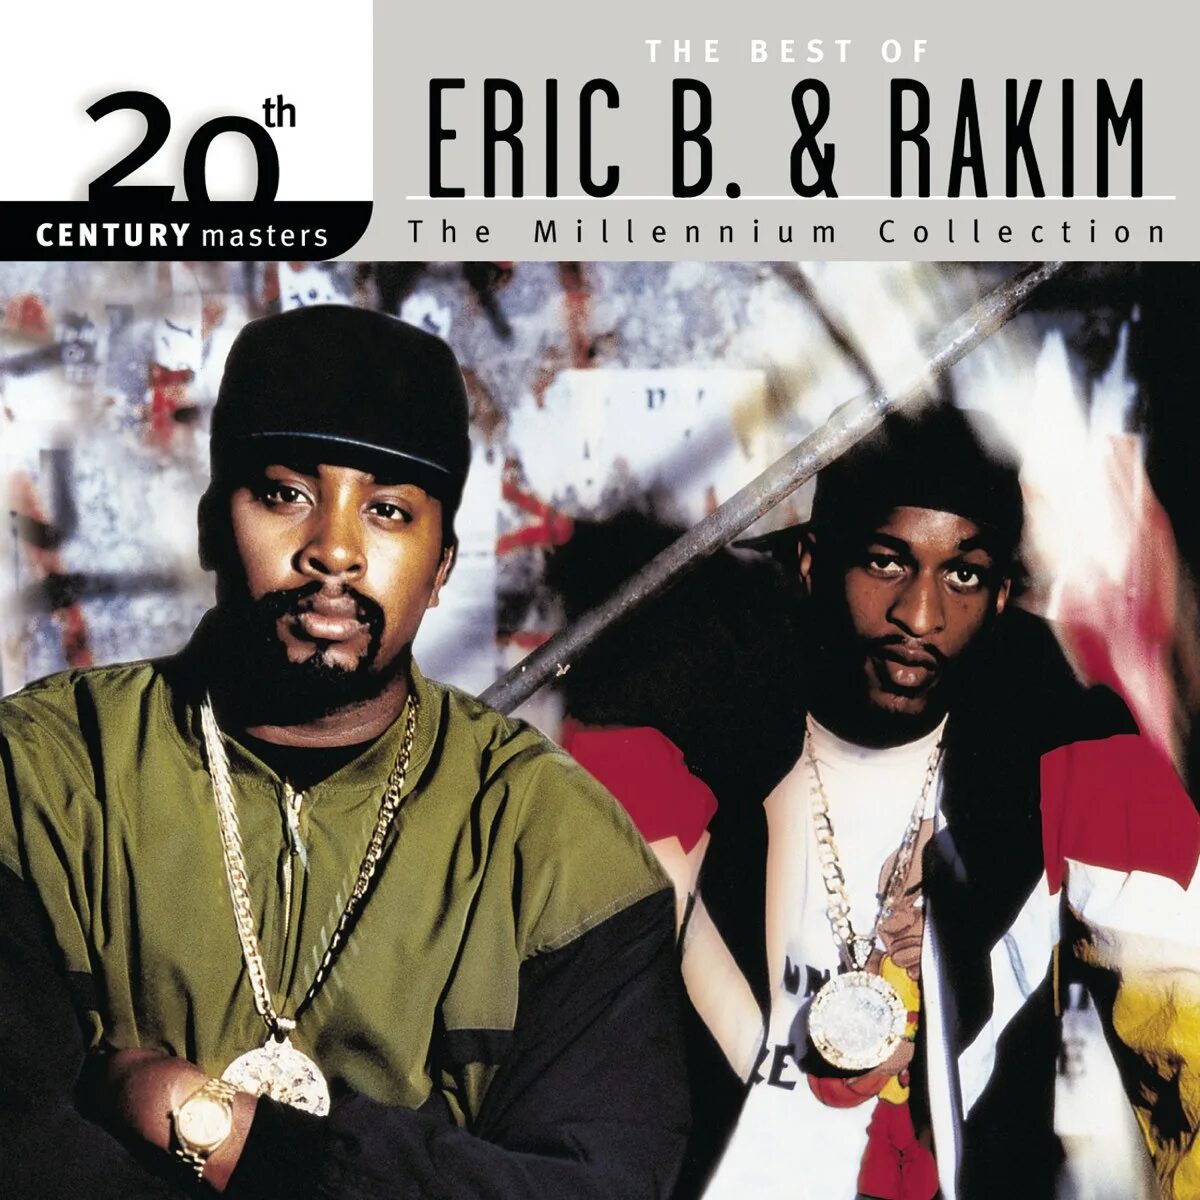 Eric b. & Rakim. Rakim the Master. Rakim 1999 the Master. 20th Century Masters the Millennium collection.